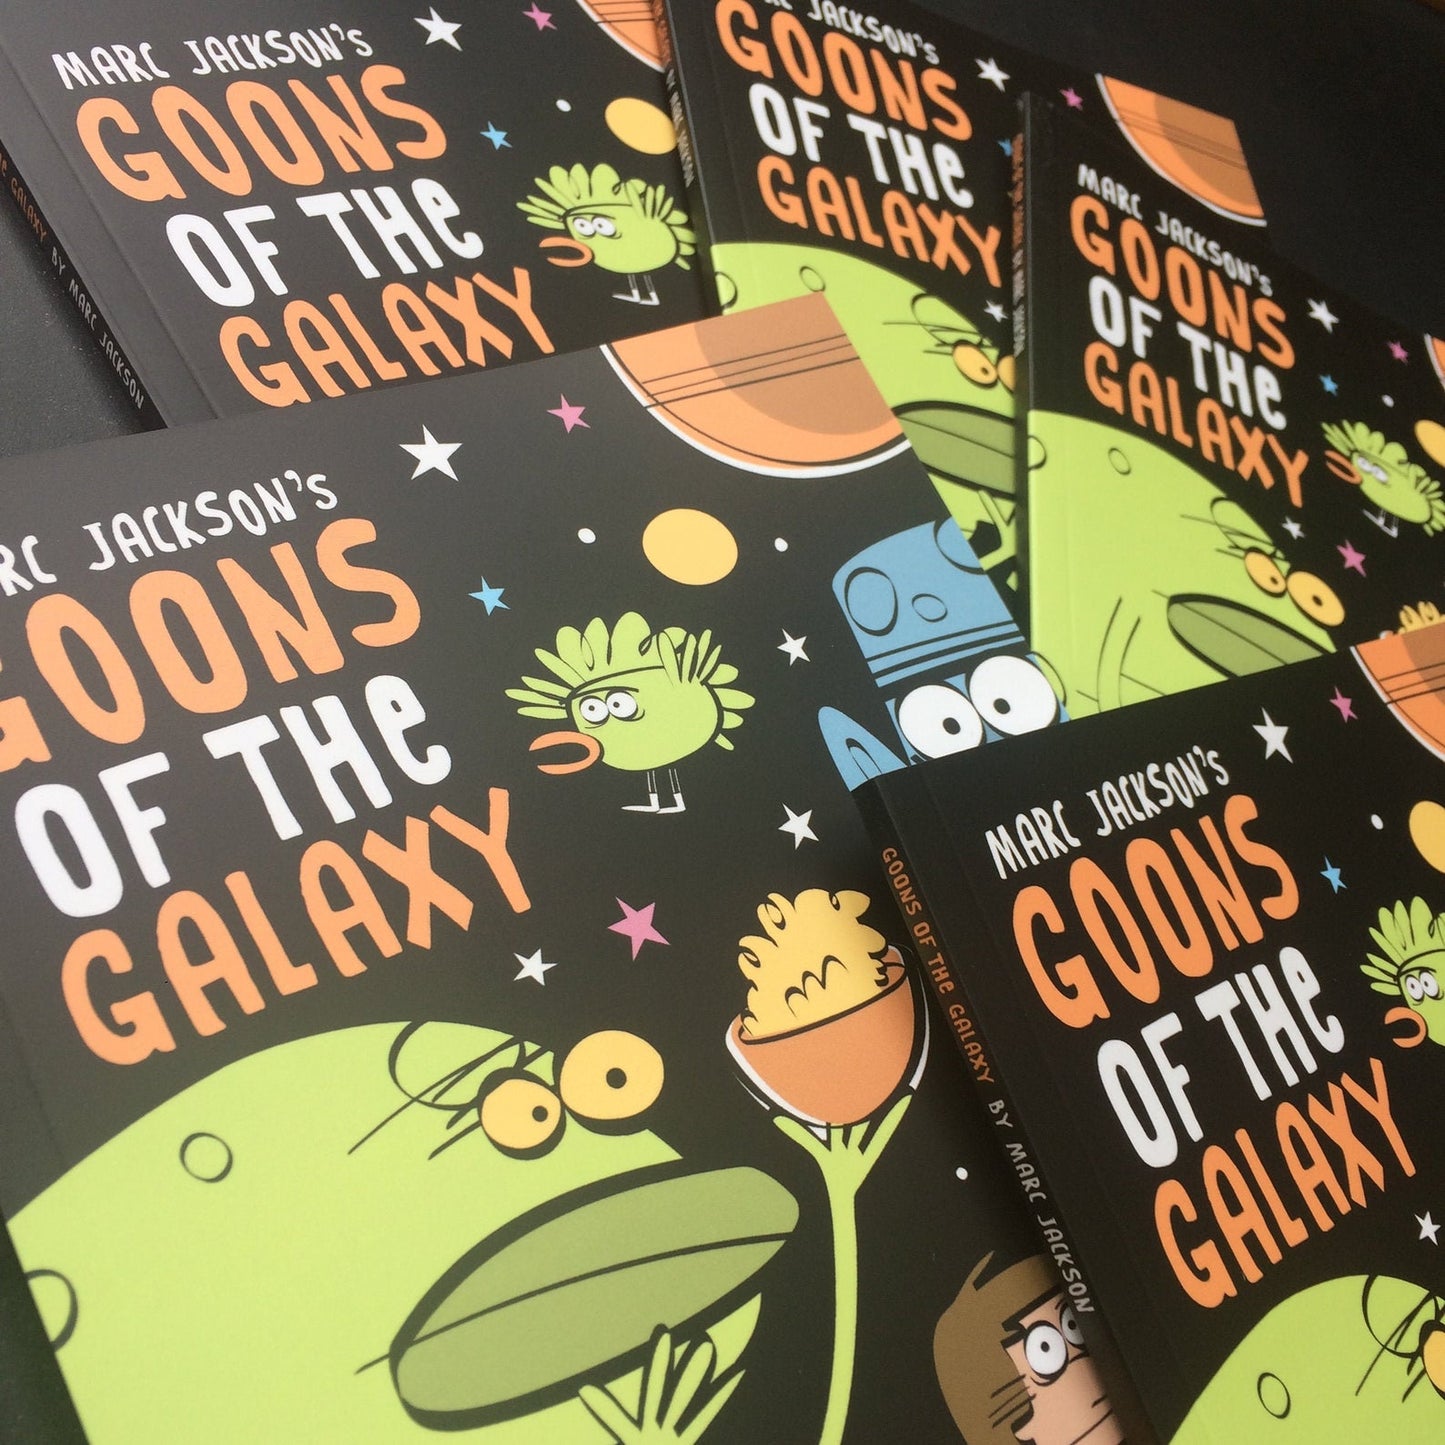 Goons of the Galaxy - Collected Edition - Loola Loves UK